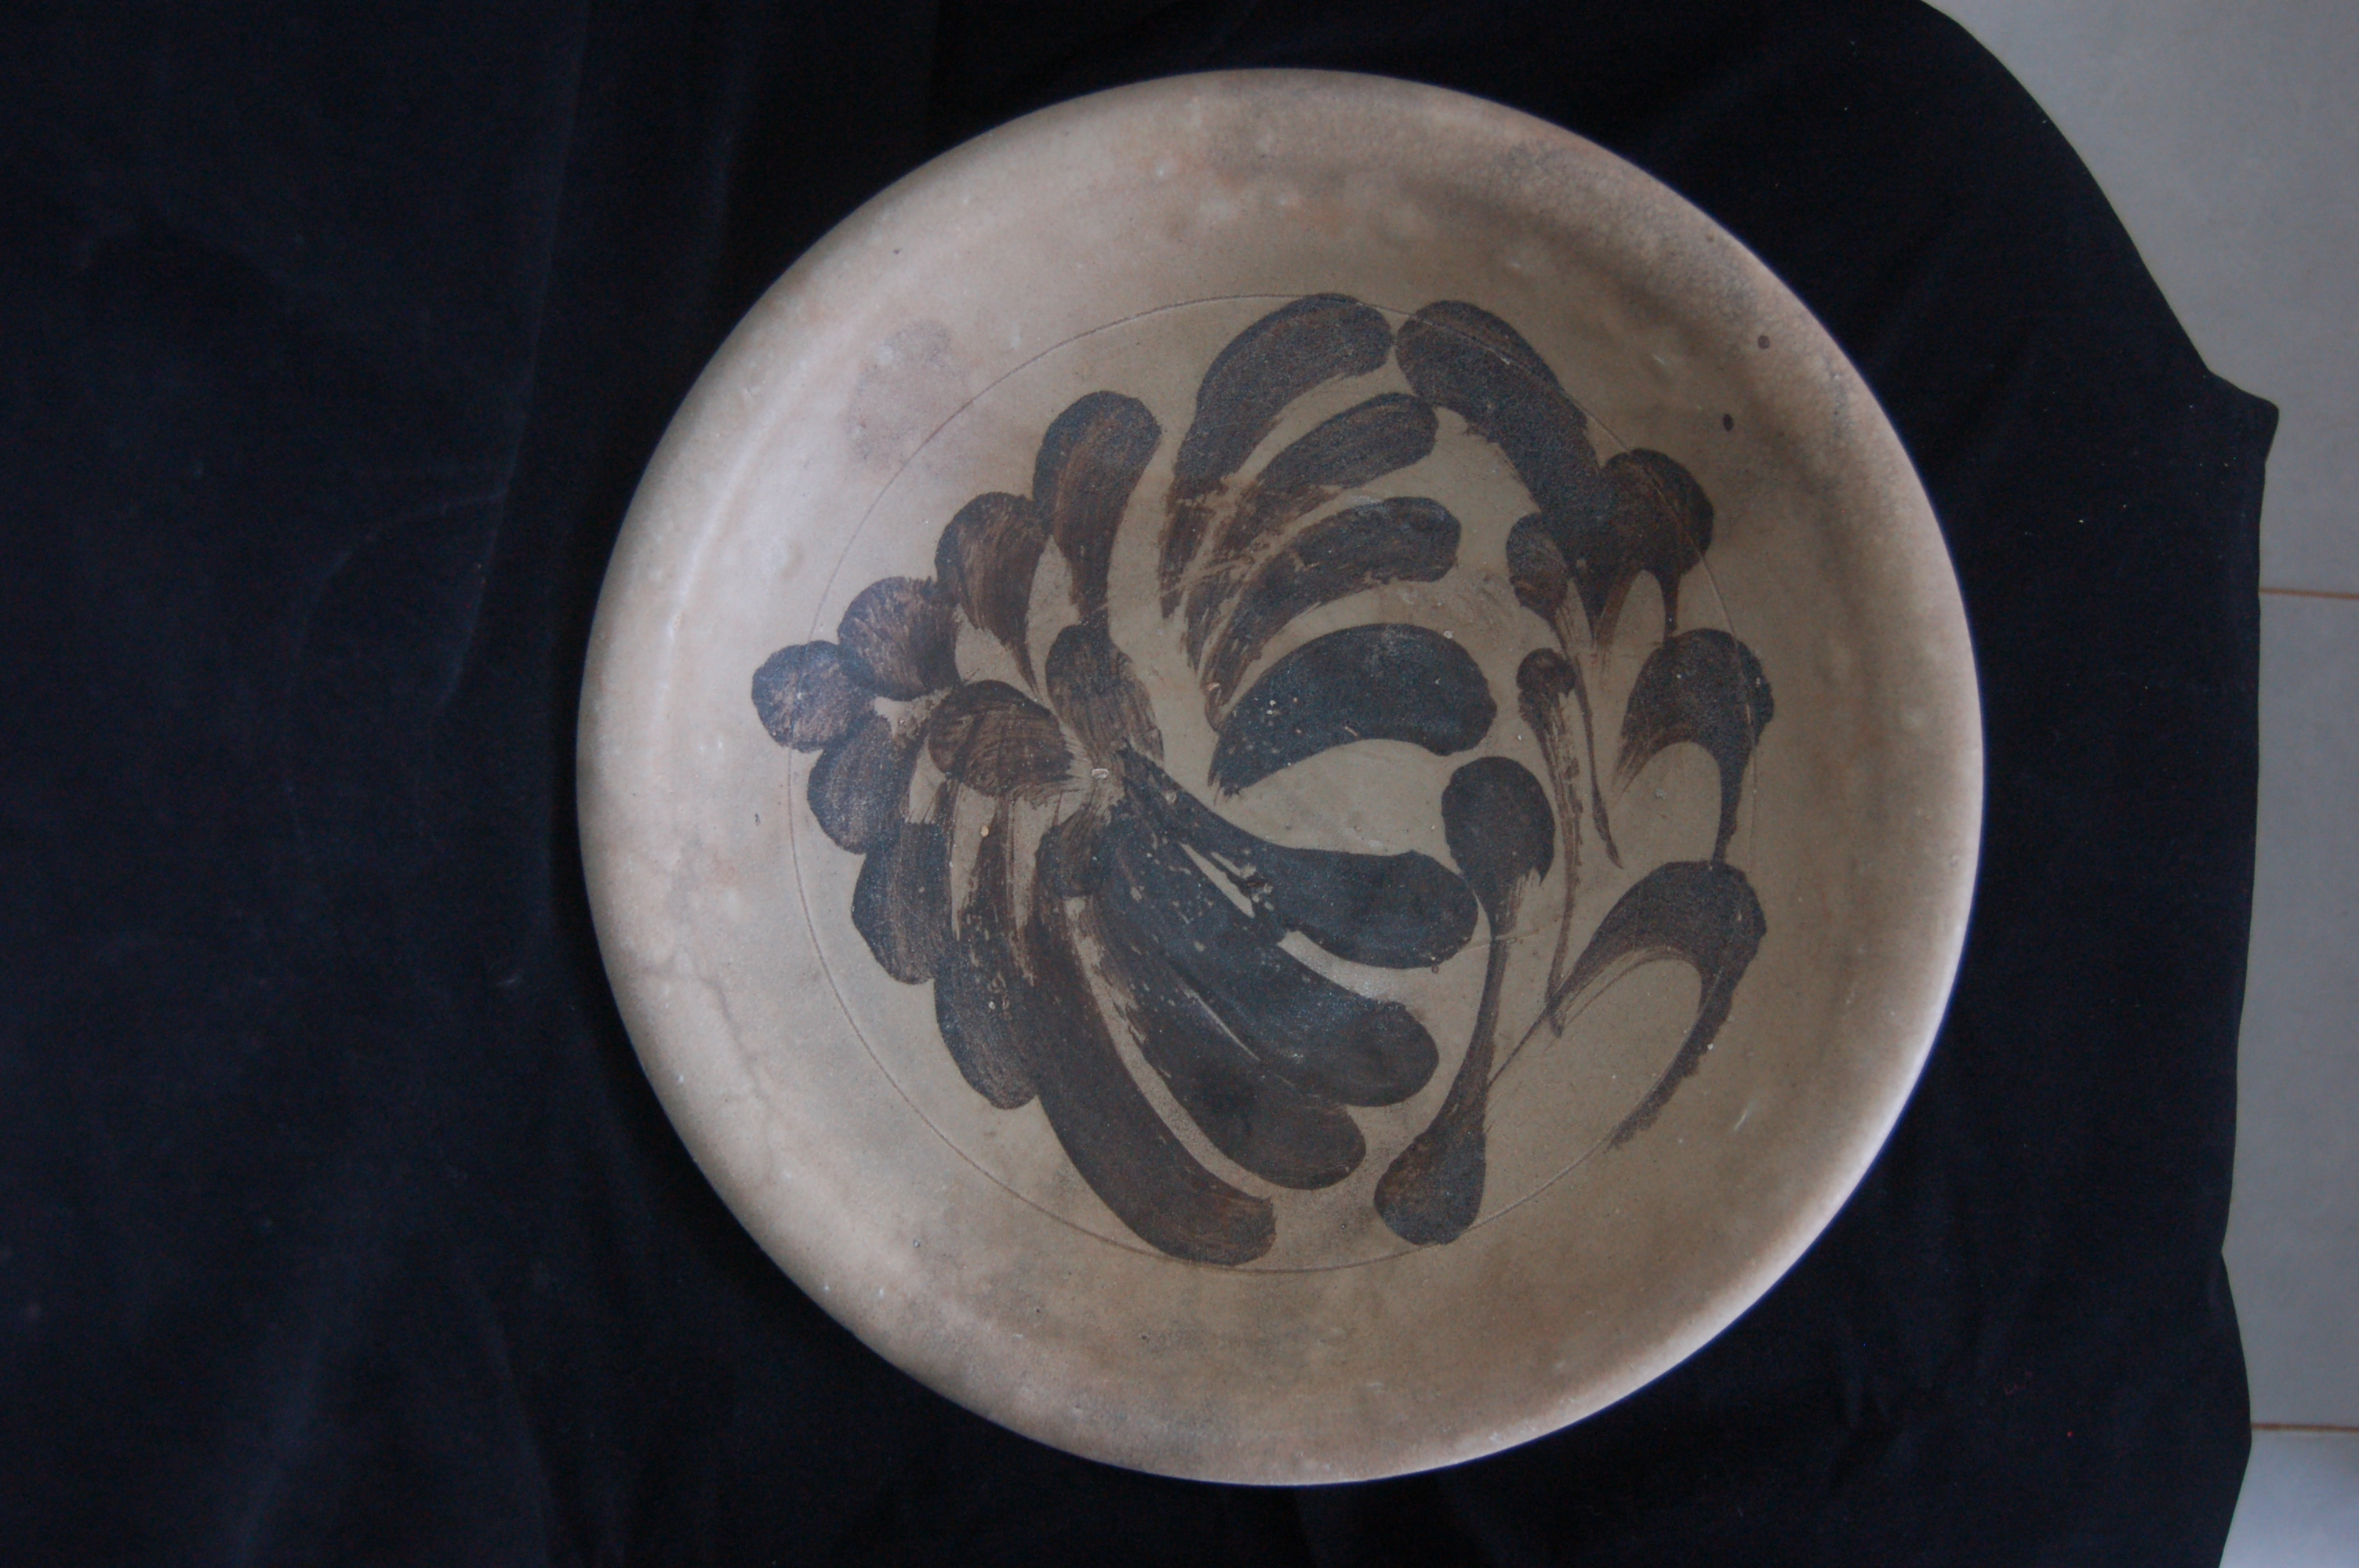 Large shallow bowl with an everted rim and a cursive floral decoration painted in iron-brown. Diameter 33 cm, height 10 cm.